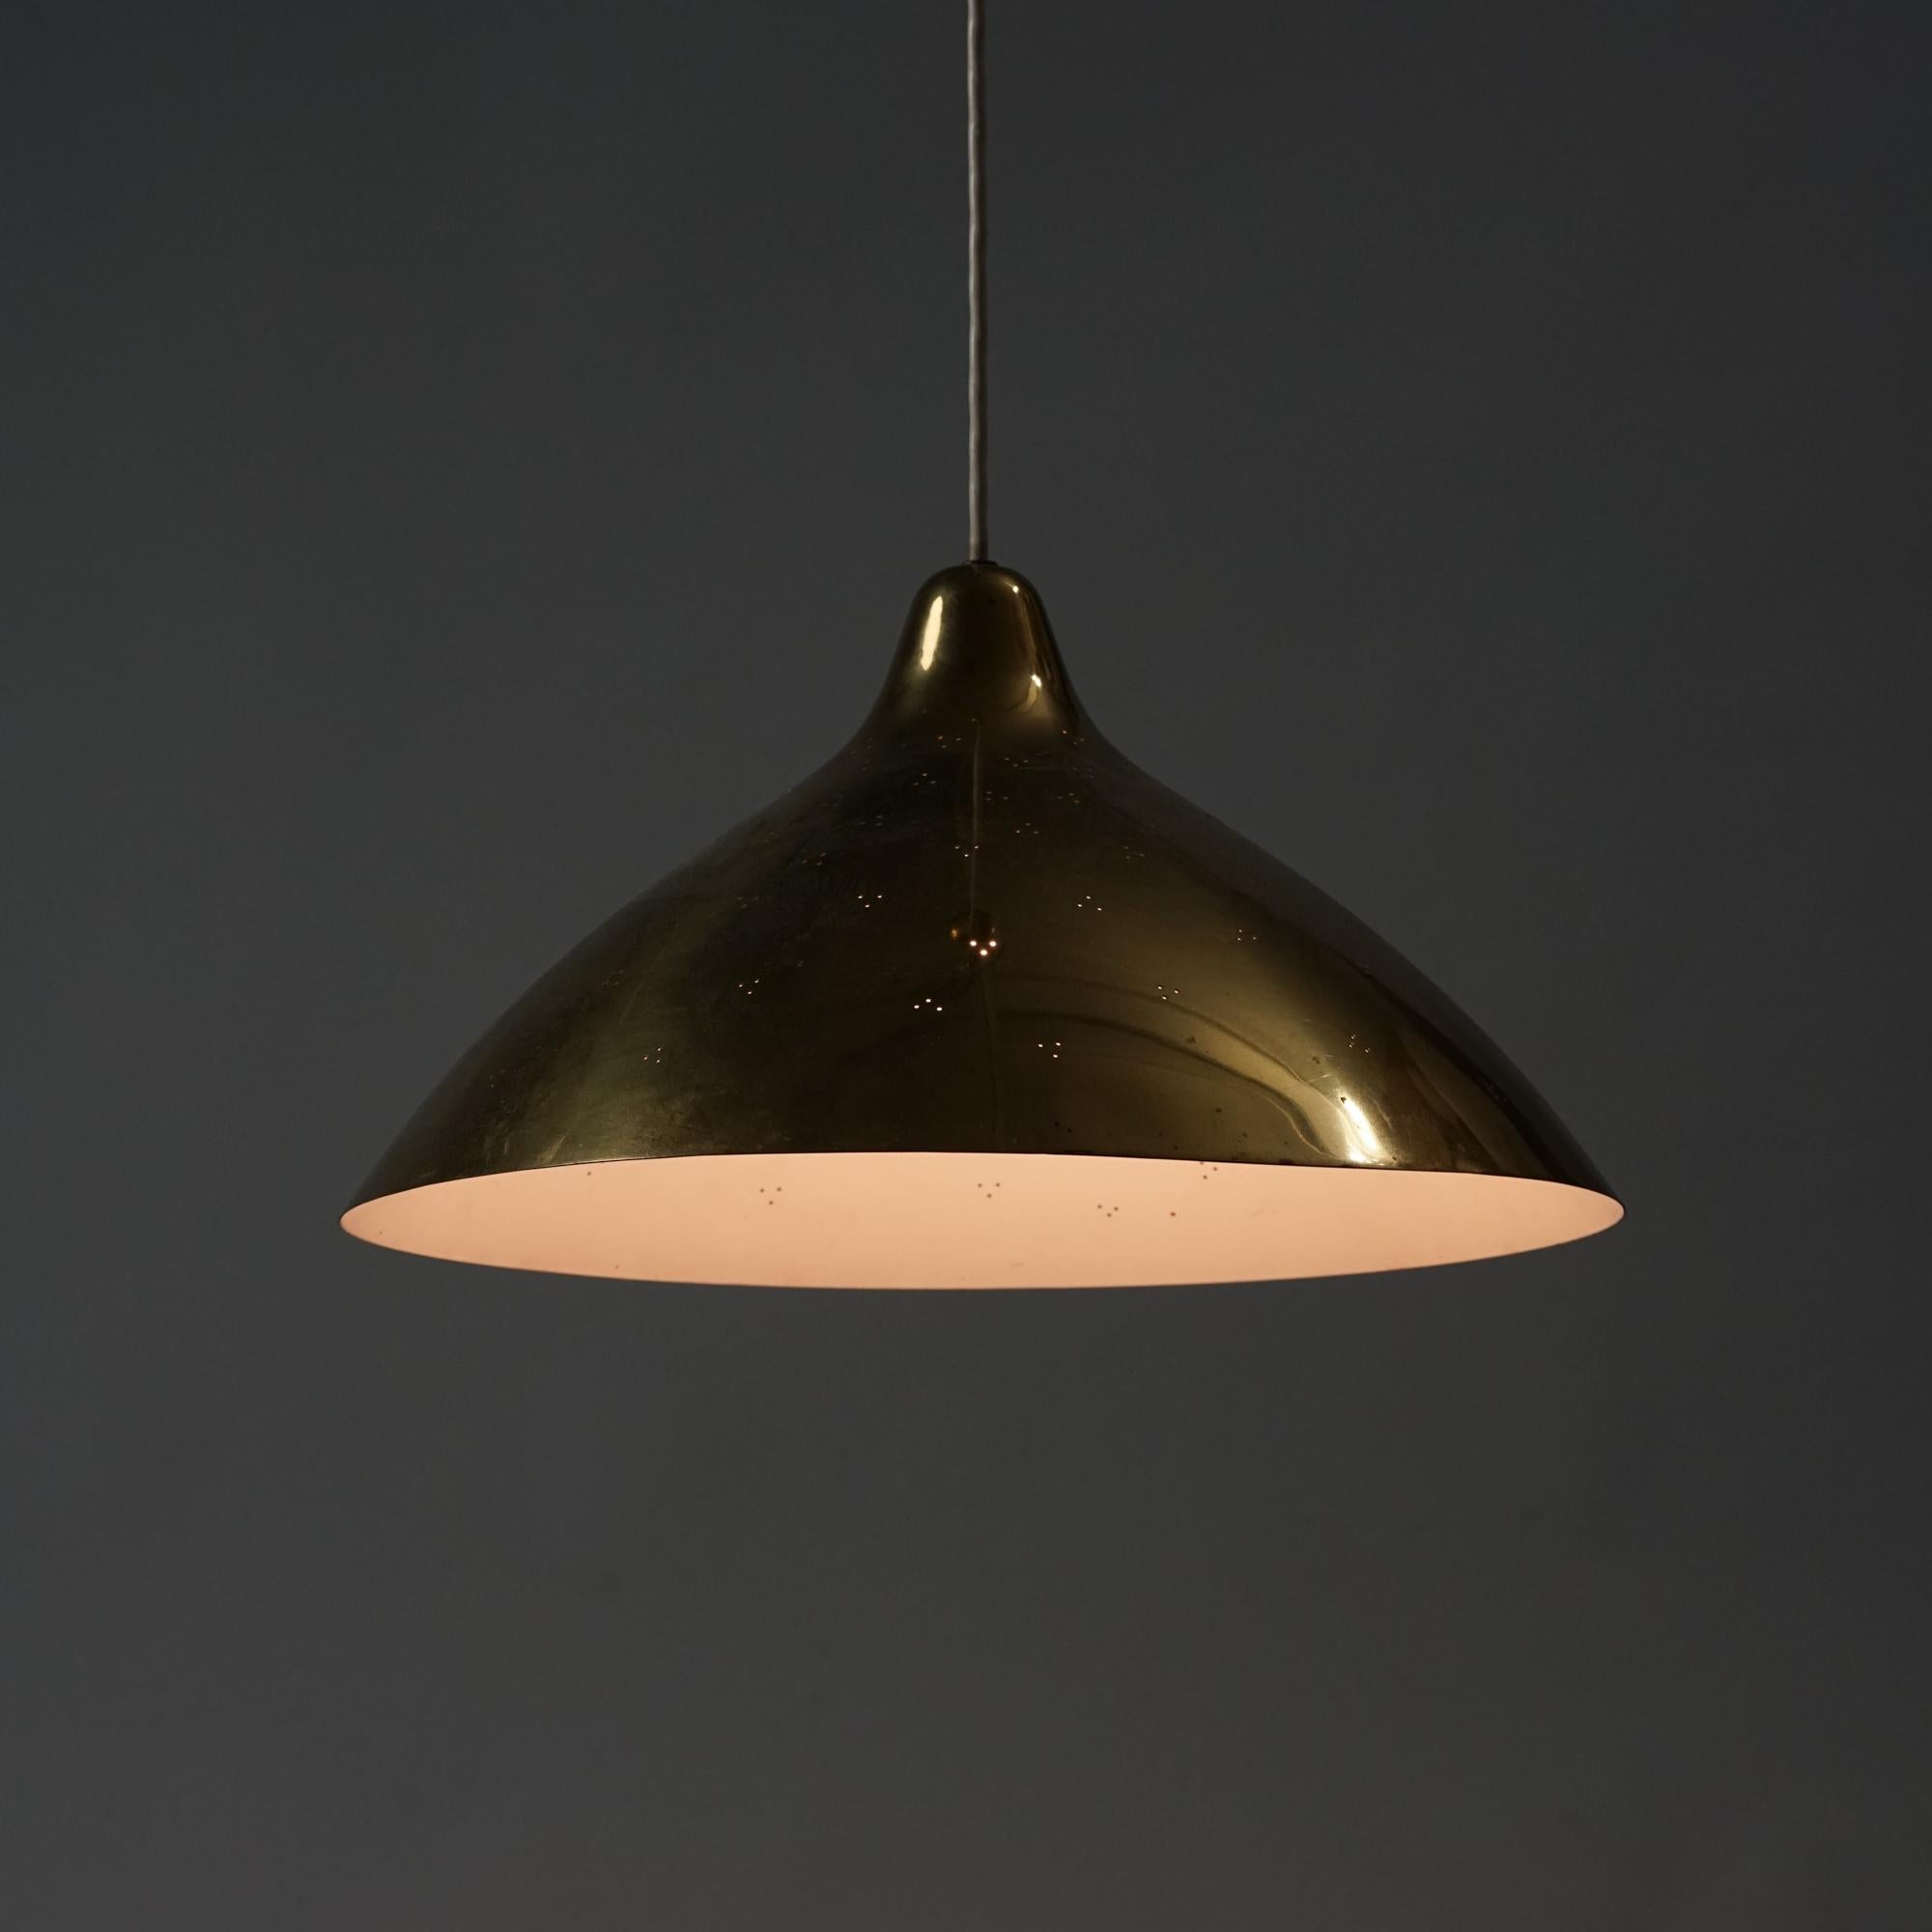 Pendant model 450, design by Lisa Johansson-Pape, manufacured by Orno from the 1950s. Brass. Good vintage condition, minor patinaand wear  consistent with age and use. Marked. Minimalistic Scandinavian Modern design. 

Measurements: diameter 45 cm,